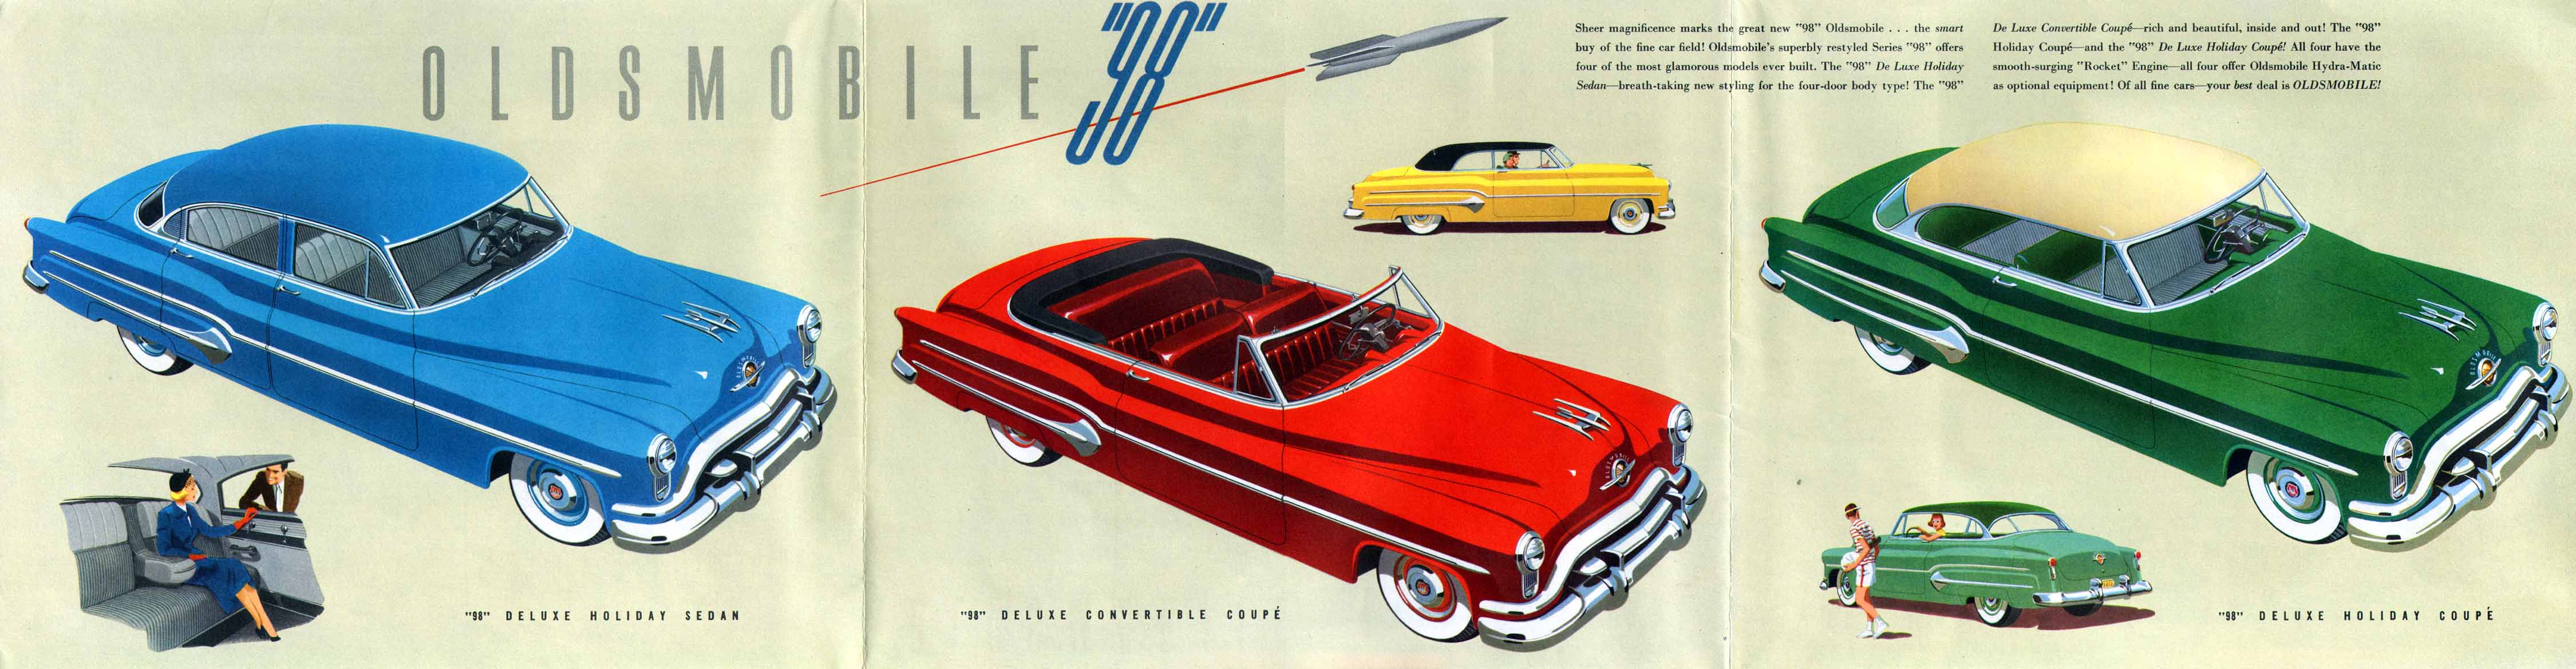 1951 Oldsmobile Motor Cars Foldout Page 4